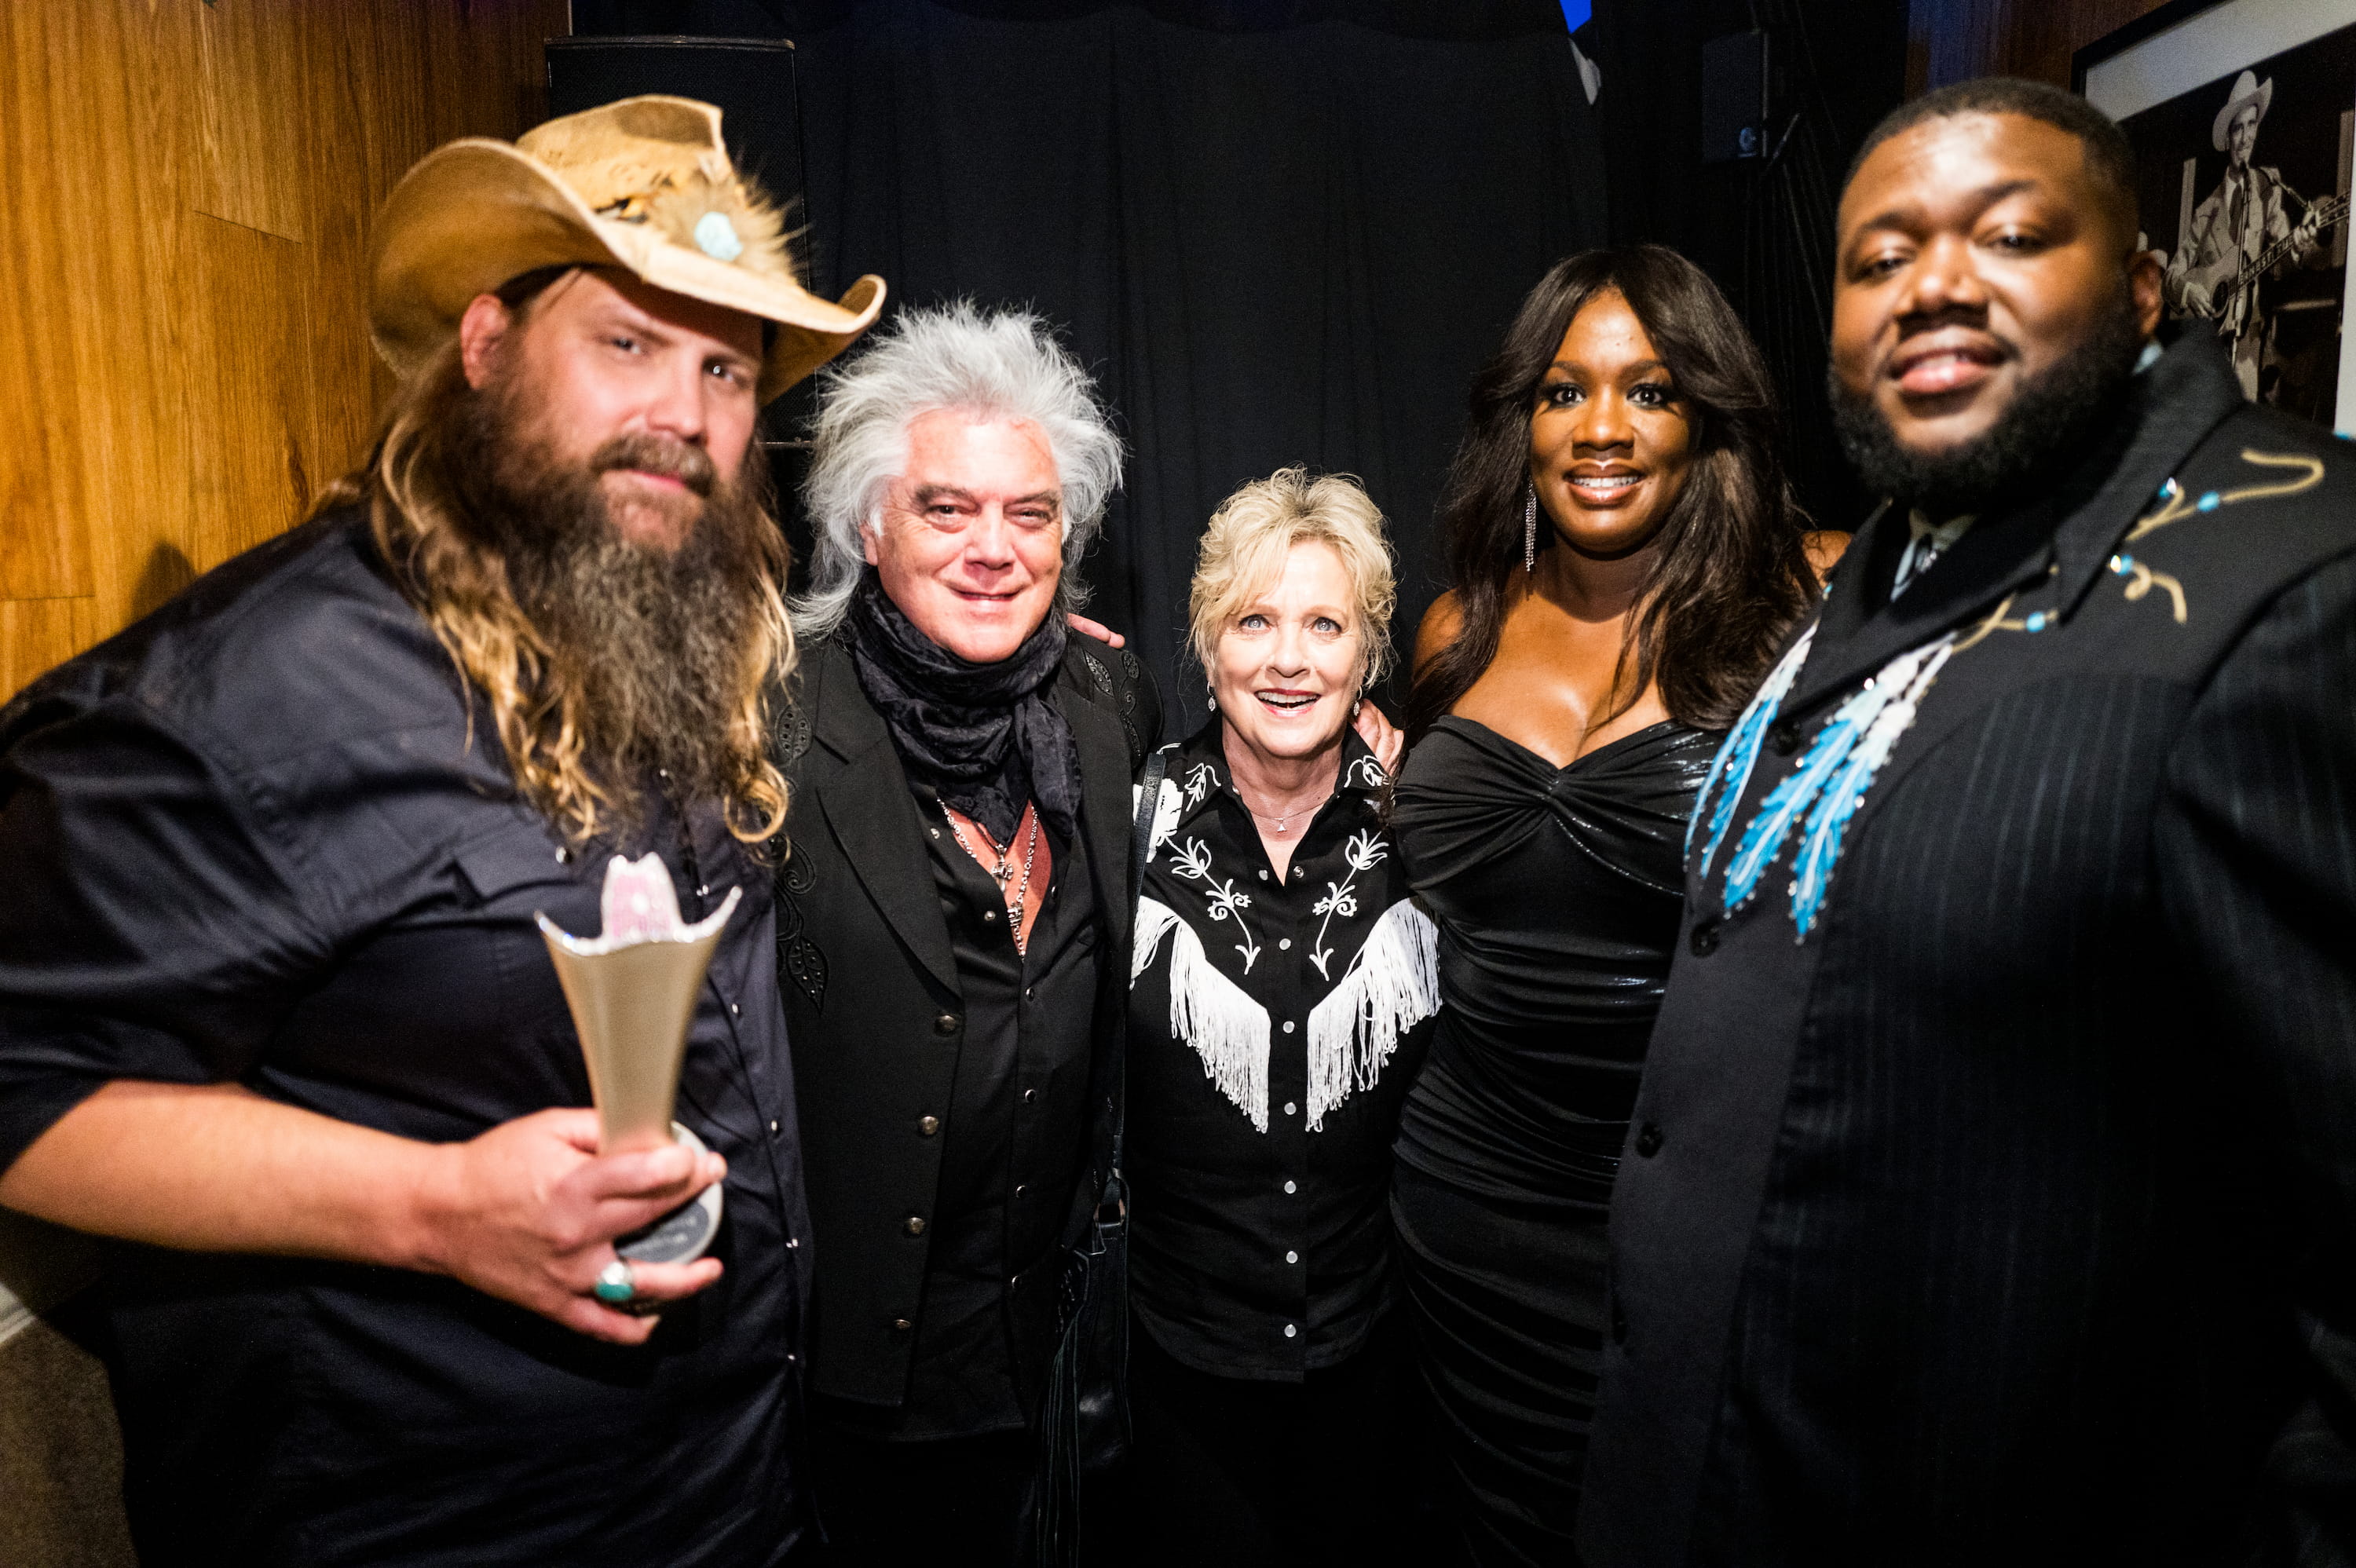 ACM Honors - Chris Stapleton, Marty Stuart, Connie Smith and The War & Treaty